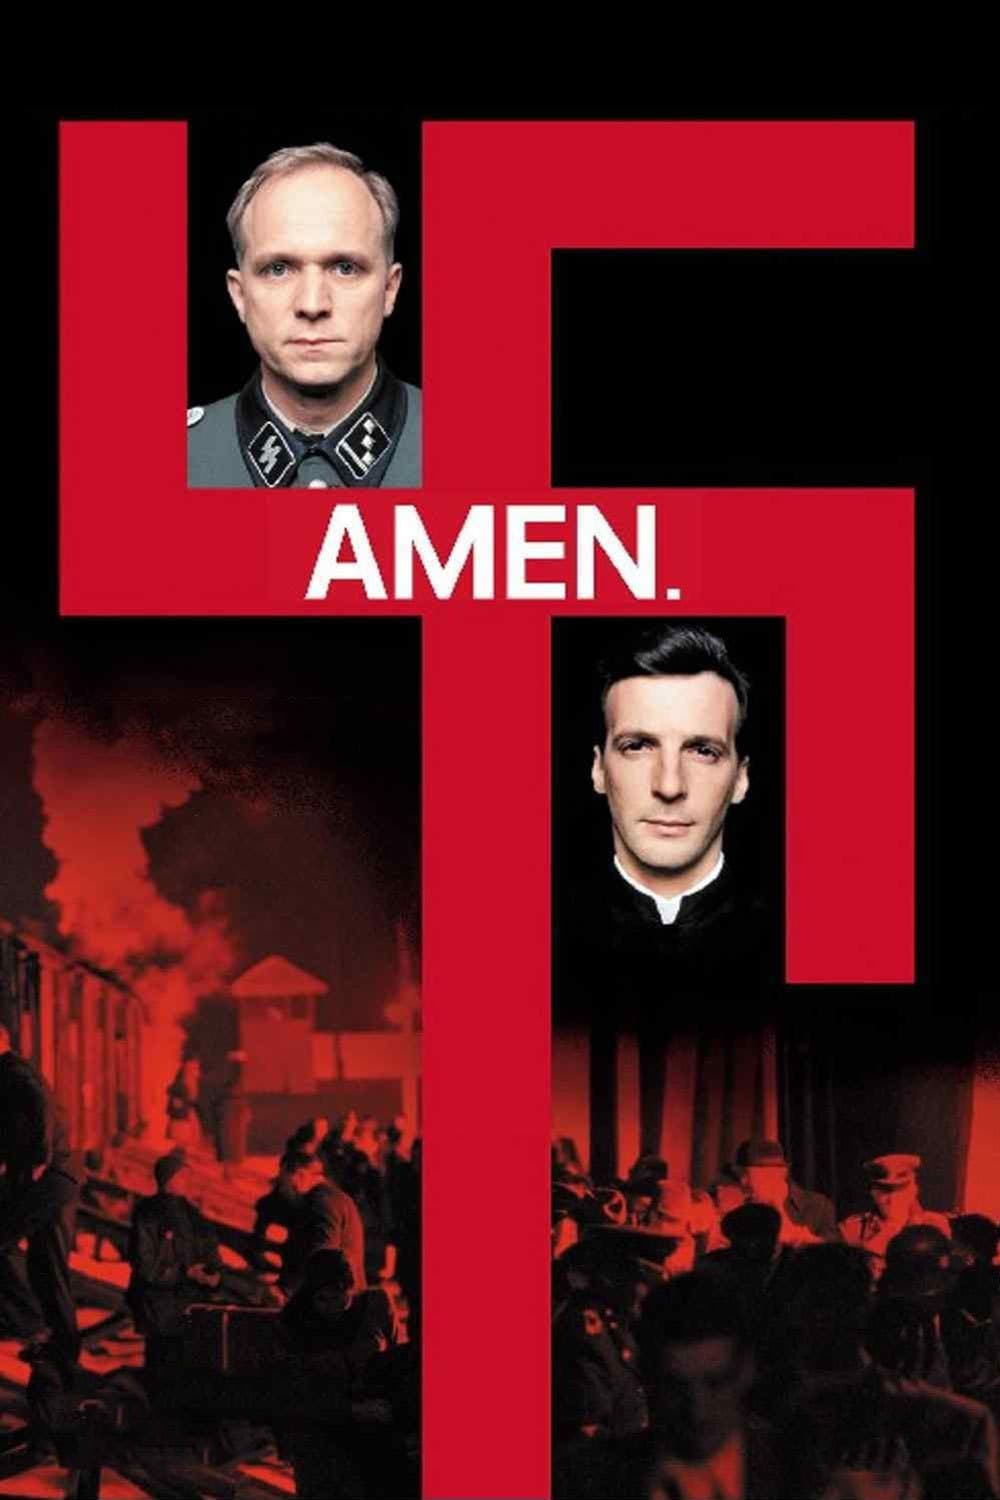 Poster for the movie "Amen."